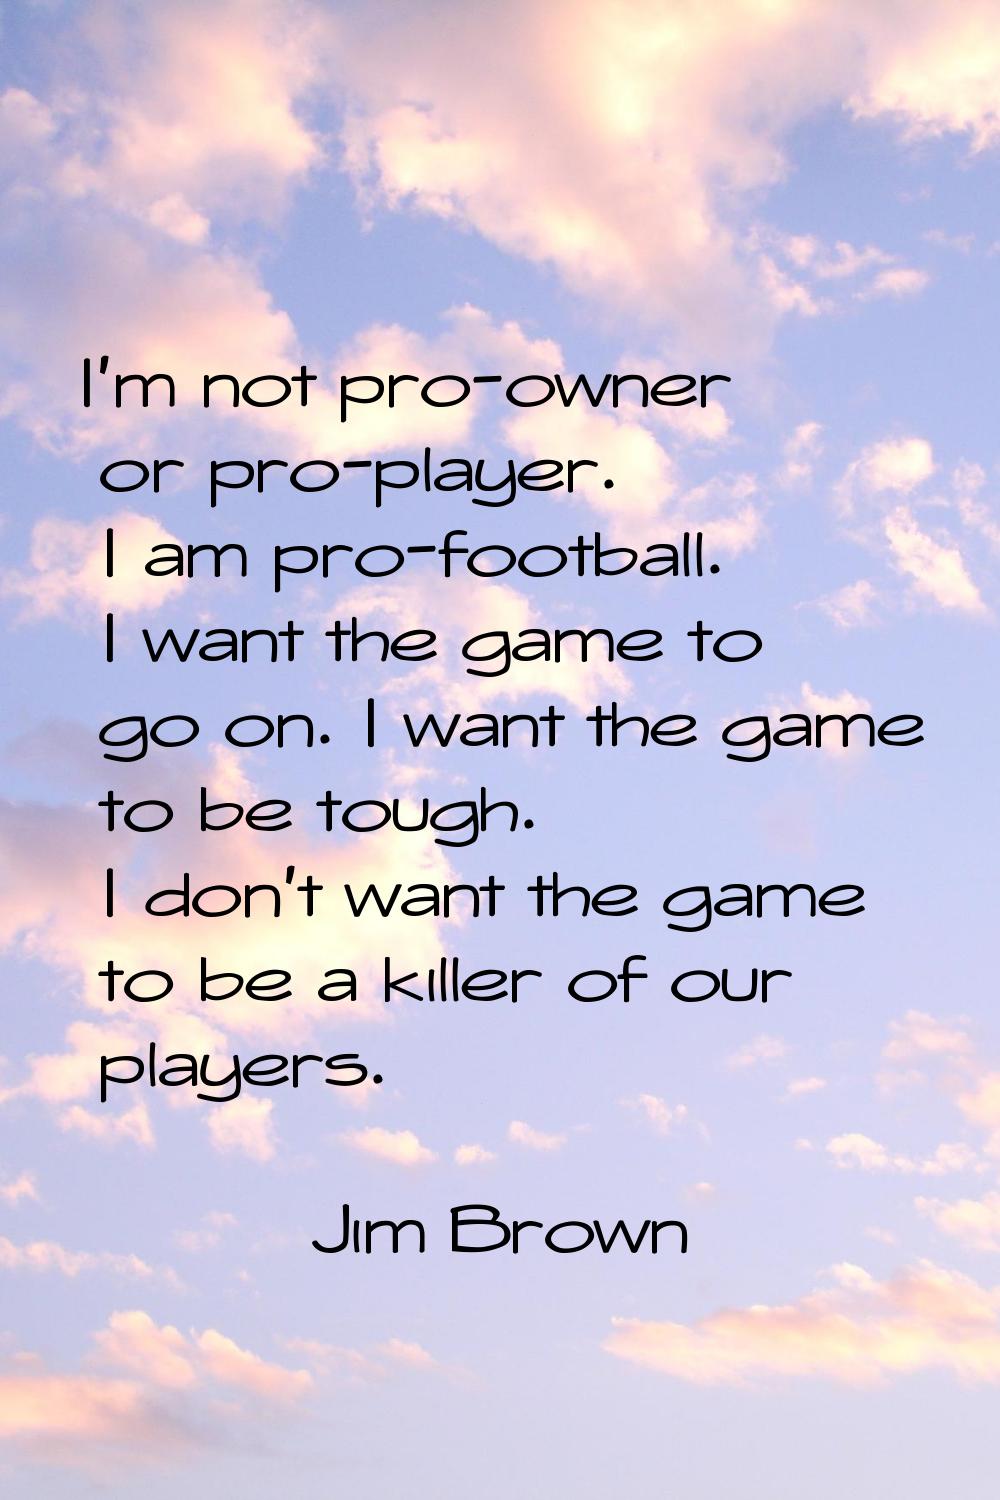 I'm not pro-owner or pro-player. I am pro-football. I want the game to go on. I want the game to be